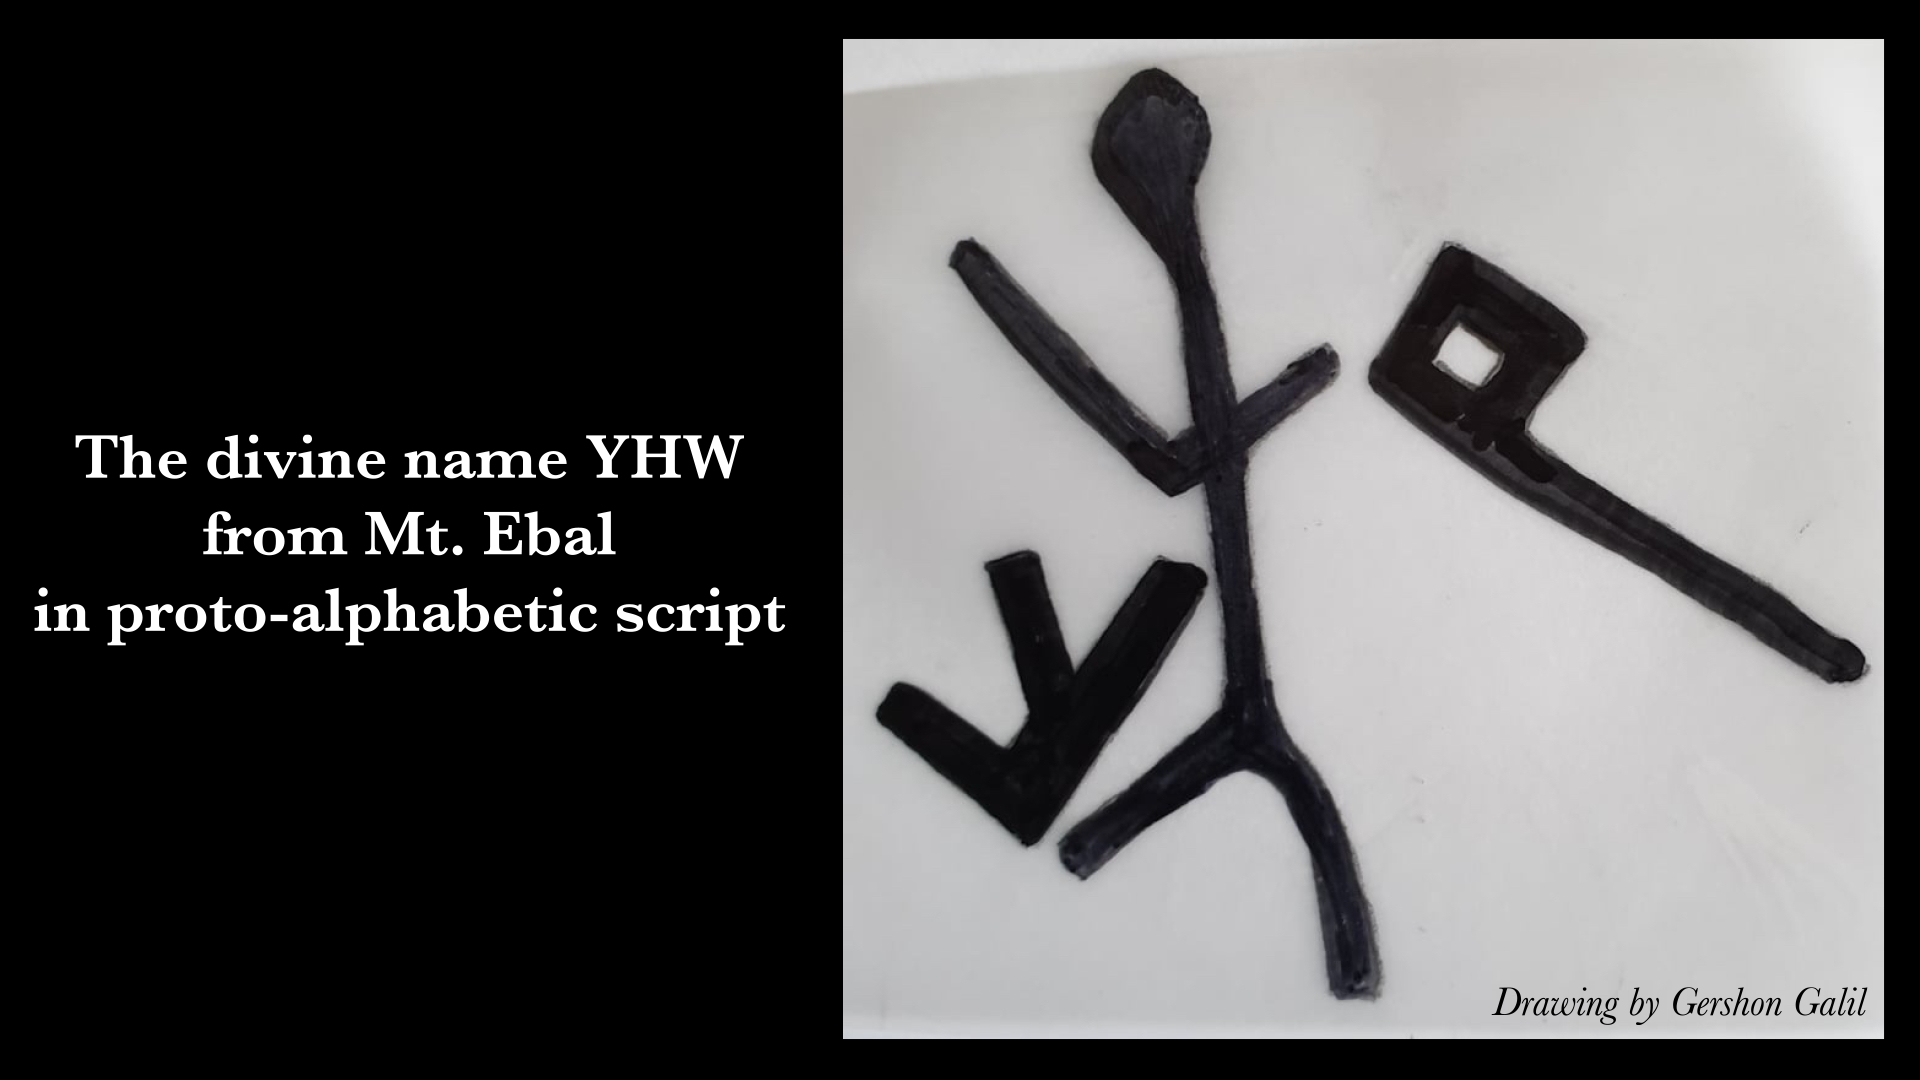 The 40-character inscription of proto-alphabetic characters on the inner and outer surfaces of the folded lead tablet appears to include a three-letter version of Yahweh, one of the Hebrew names of God.